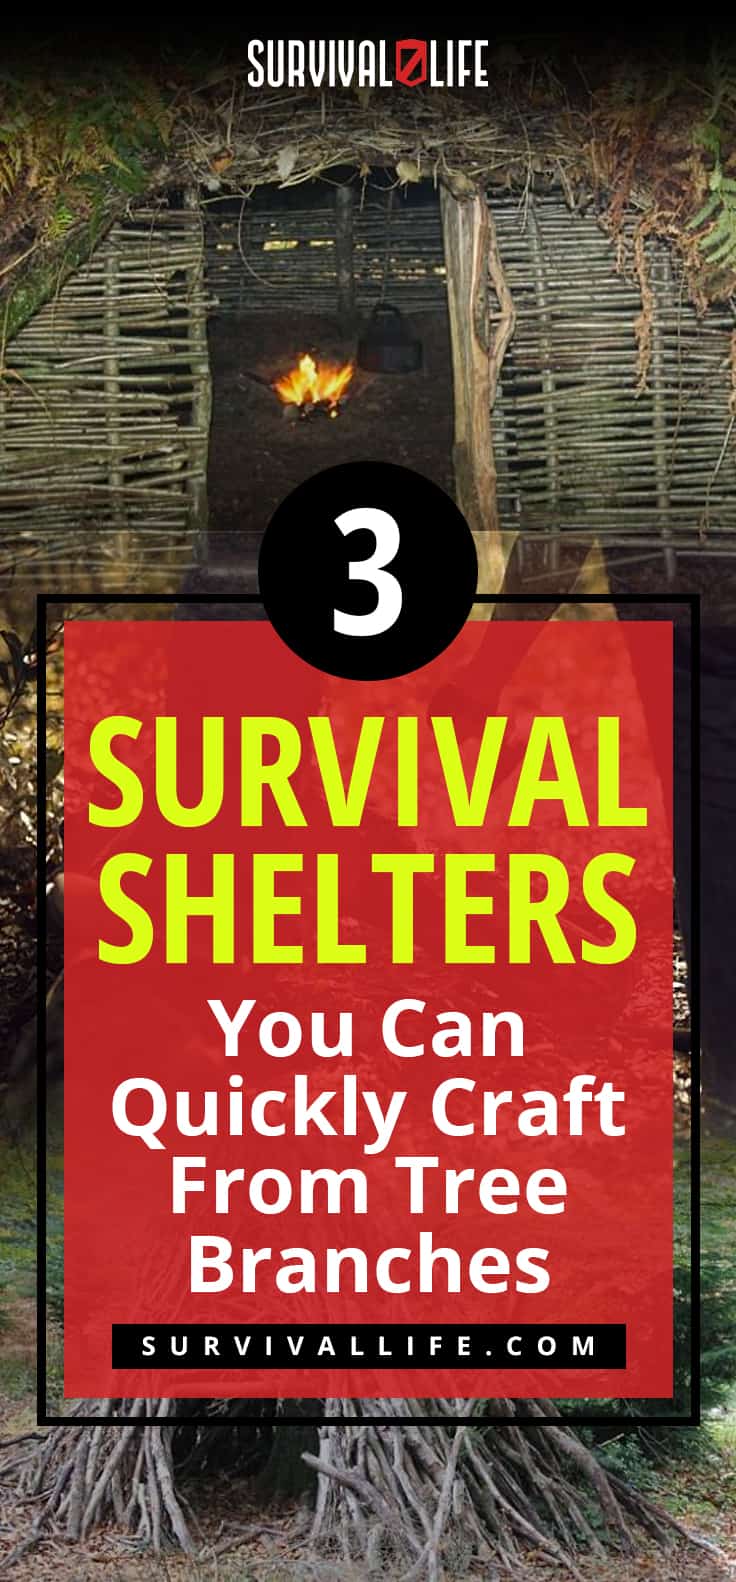 3 Survival Shelters You Can Quickly Craft From Tree Branches